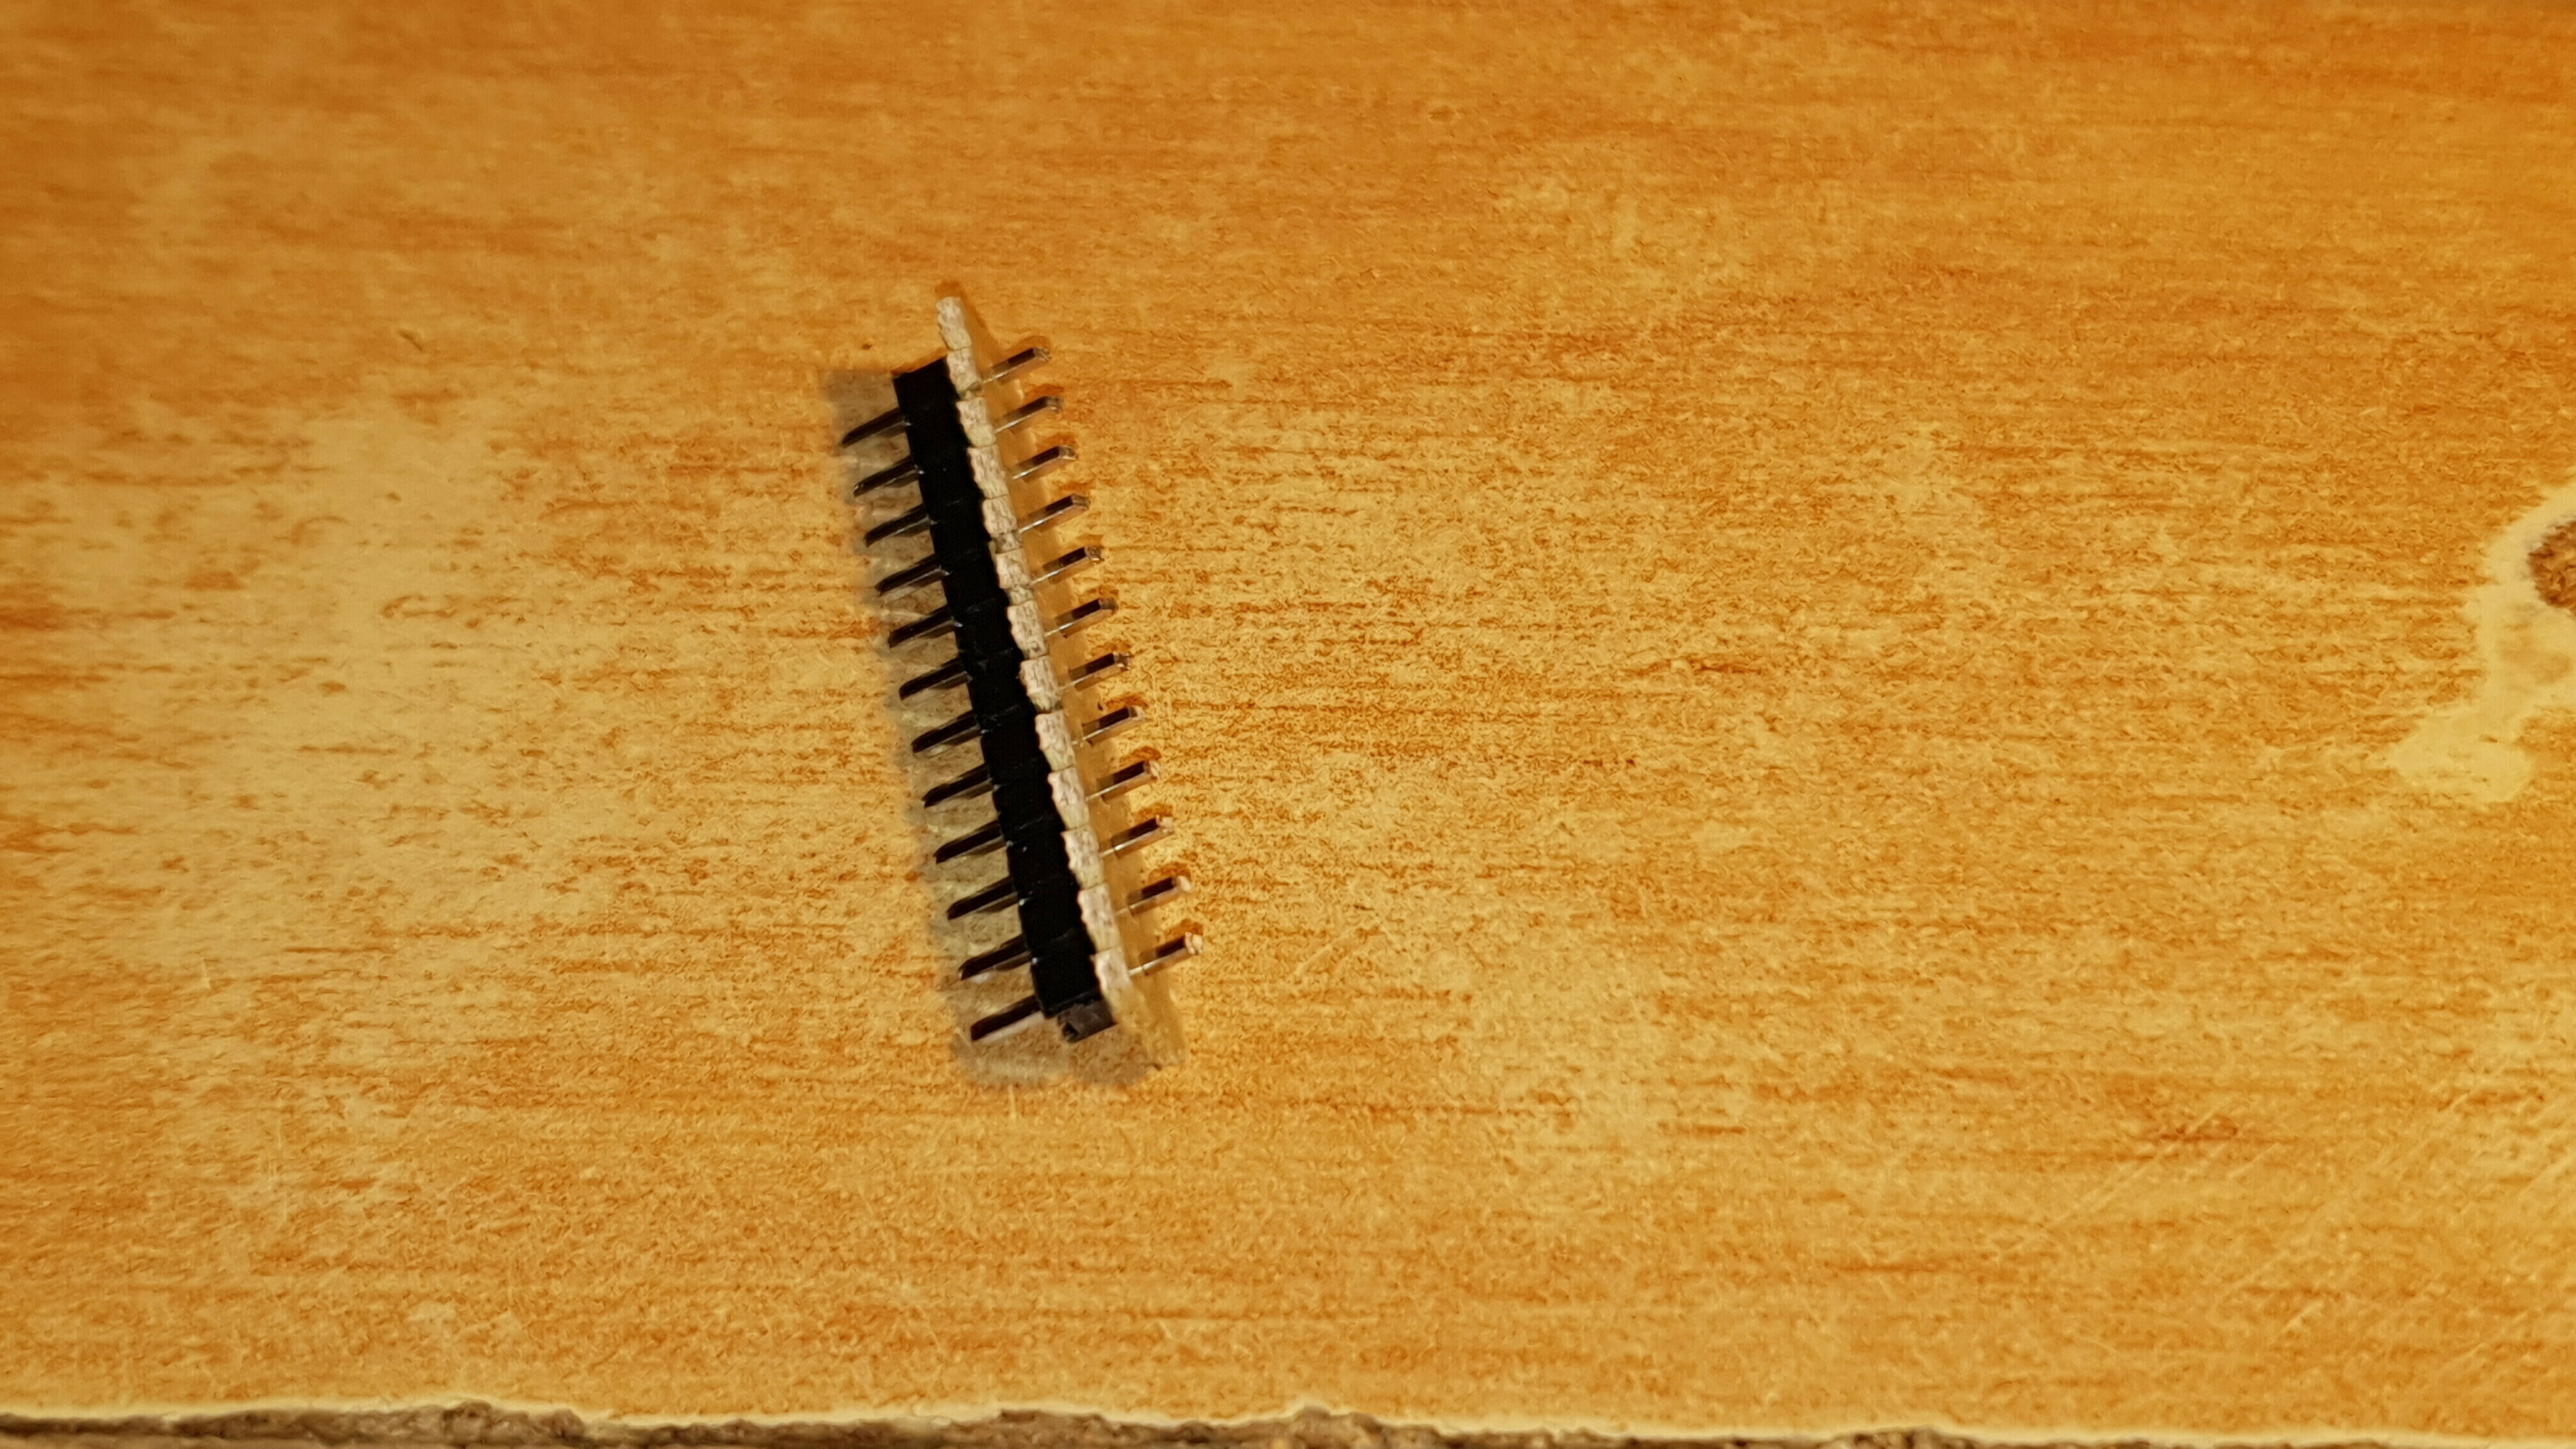 trimmed_pins_with_spacer.jpg